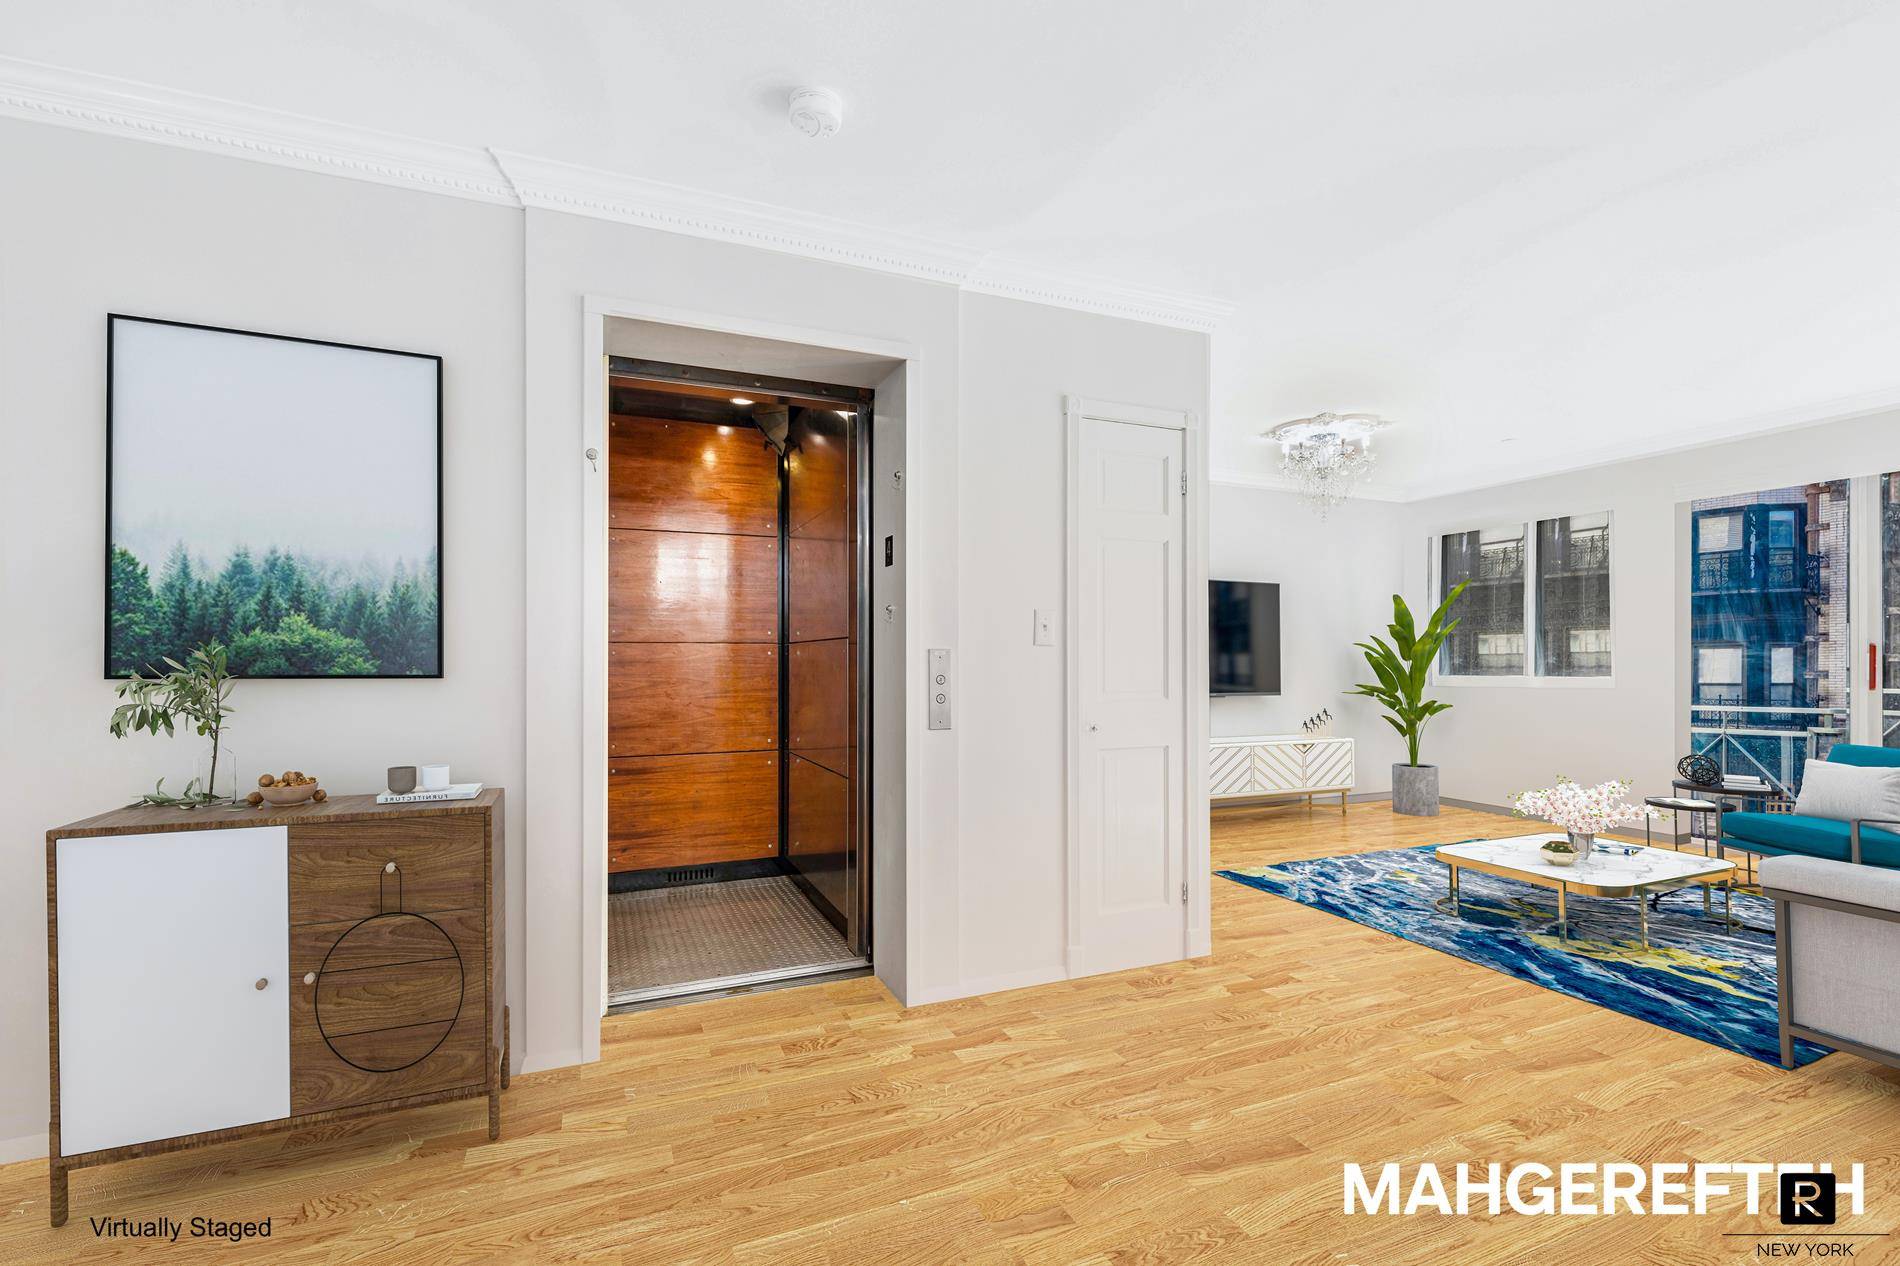 This is your chance to own a full floor in the desirable NoLiTa community that rarely comes on the market.